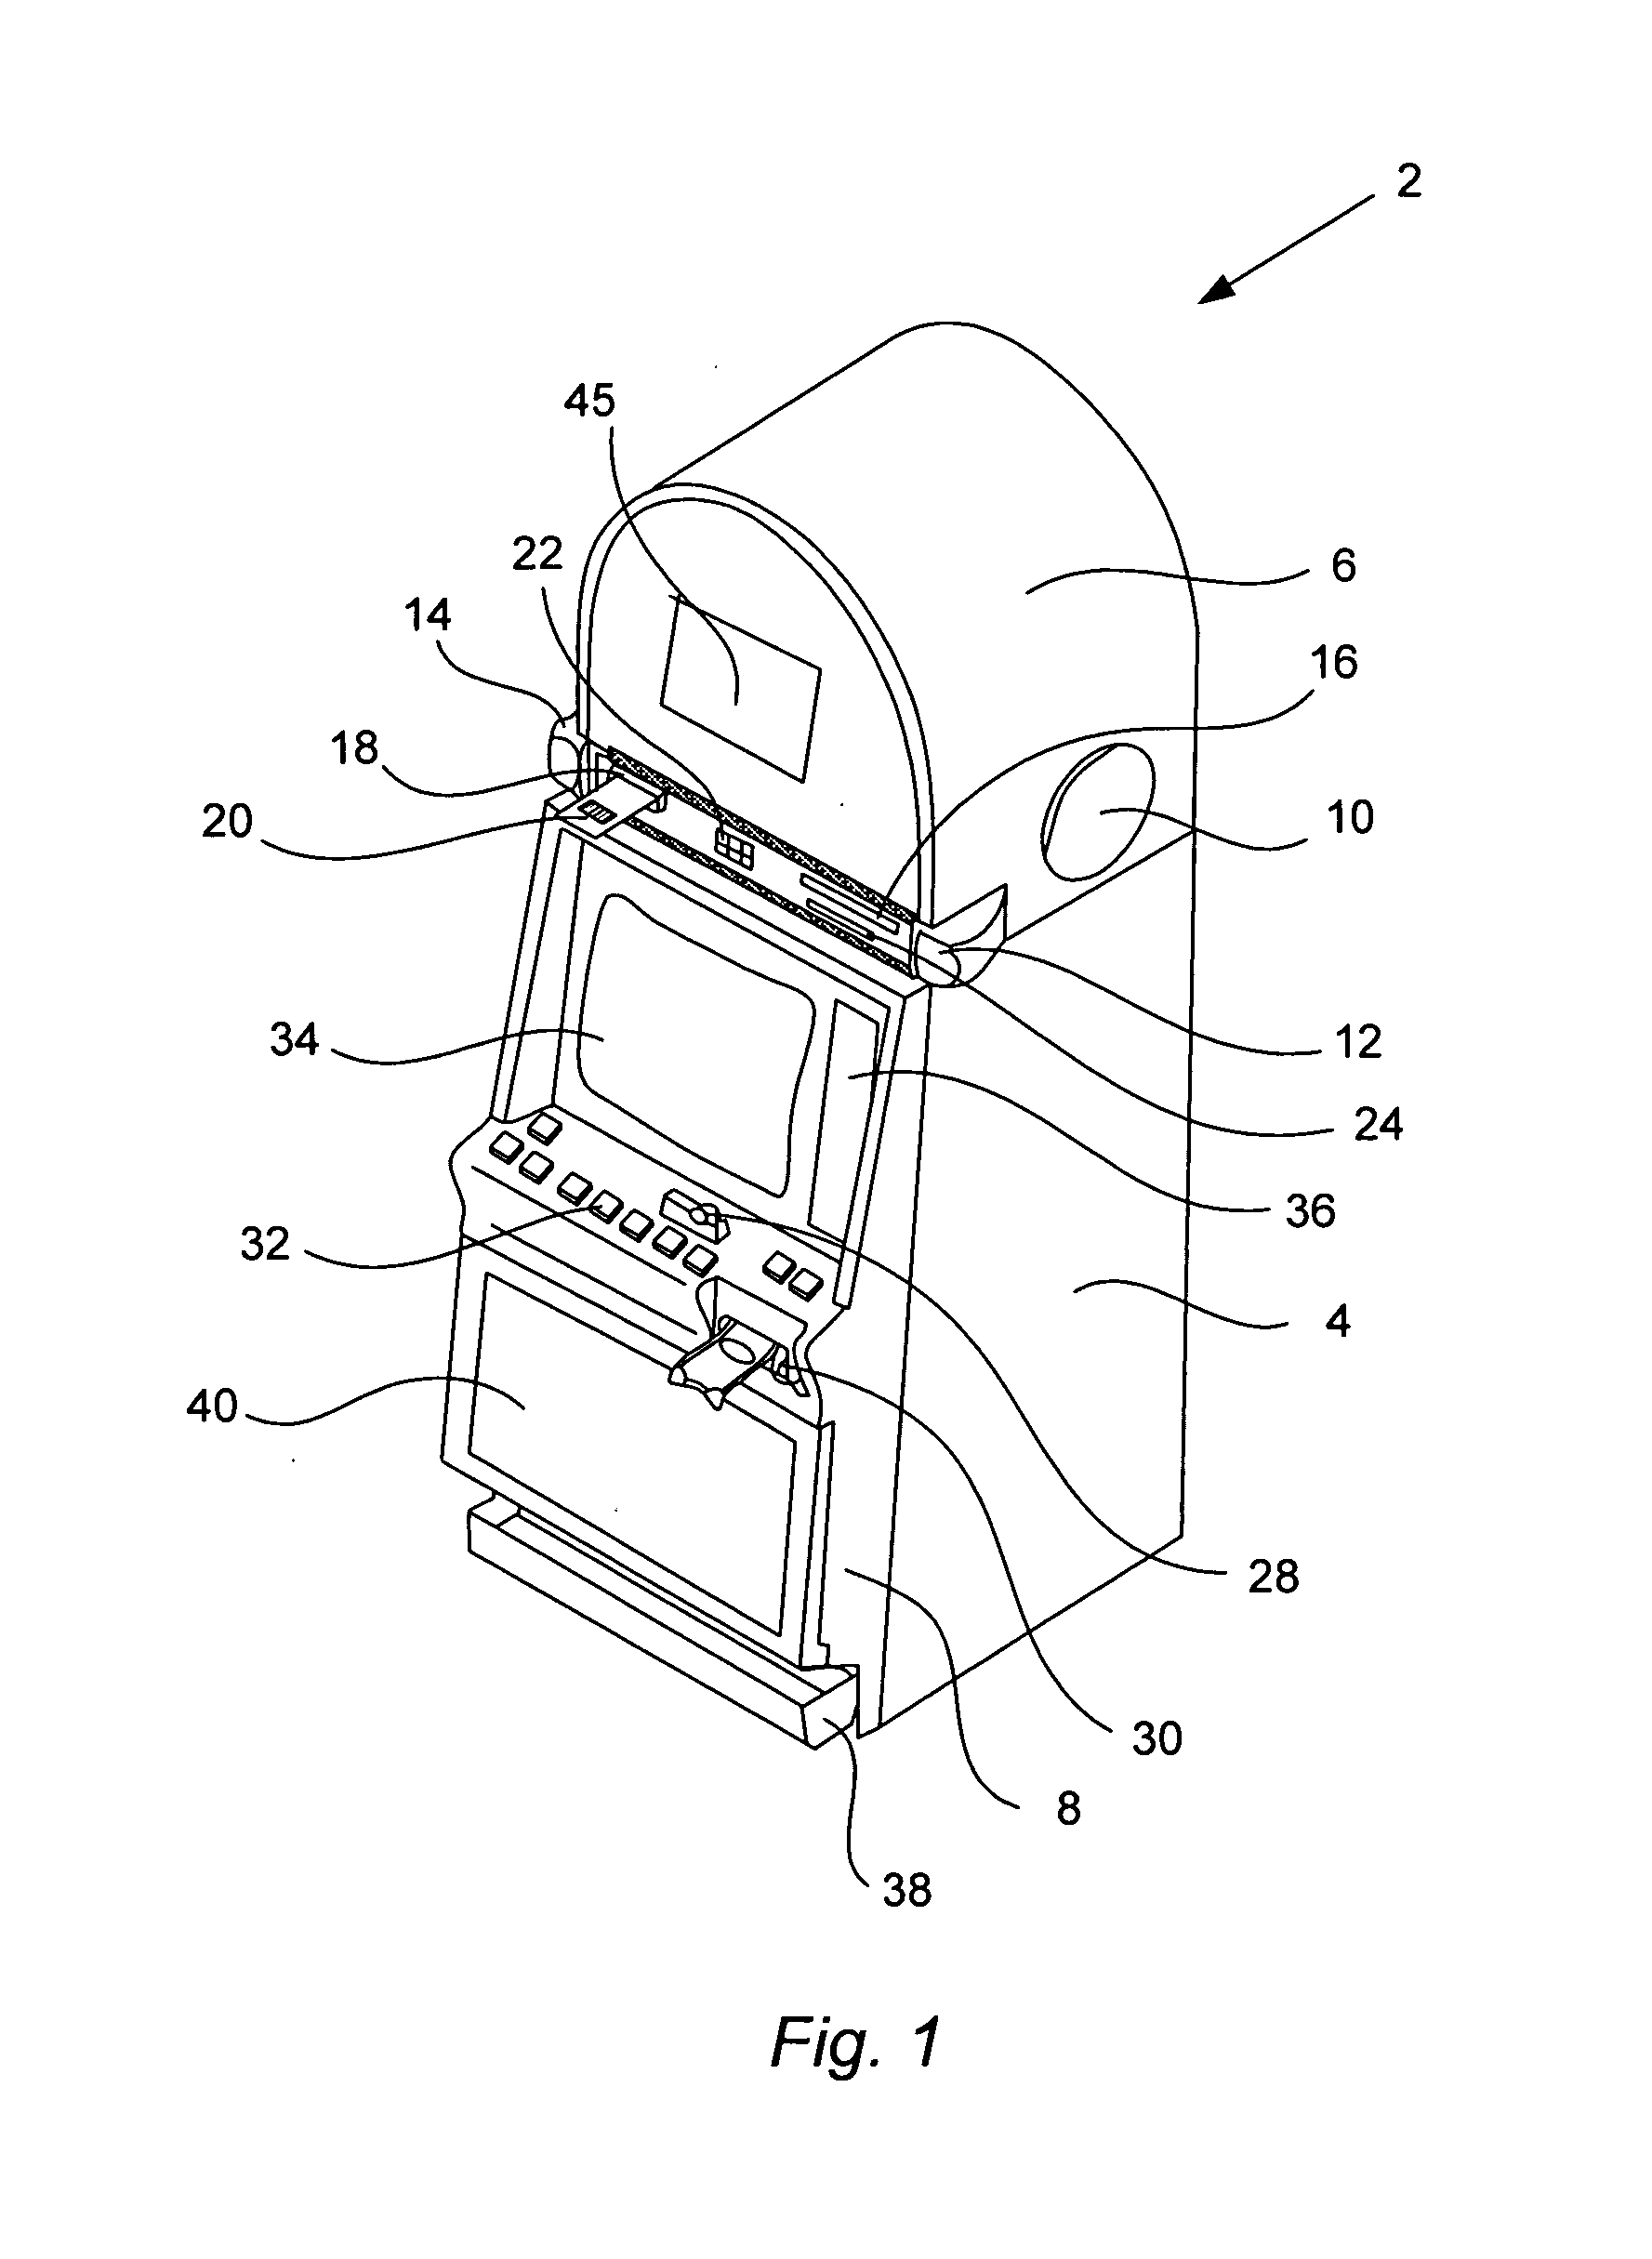 Shock prevention device and system for display